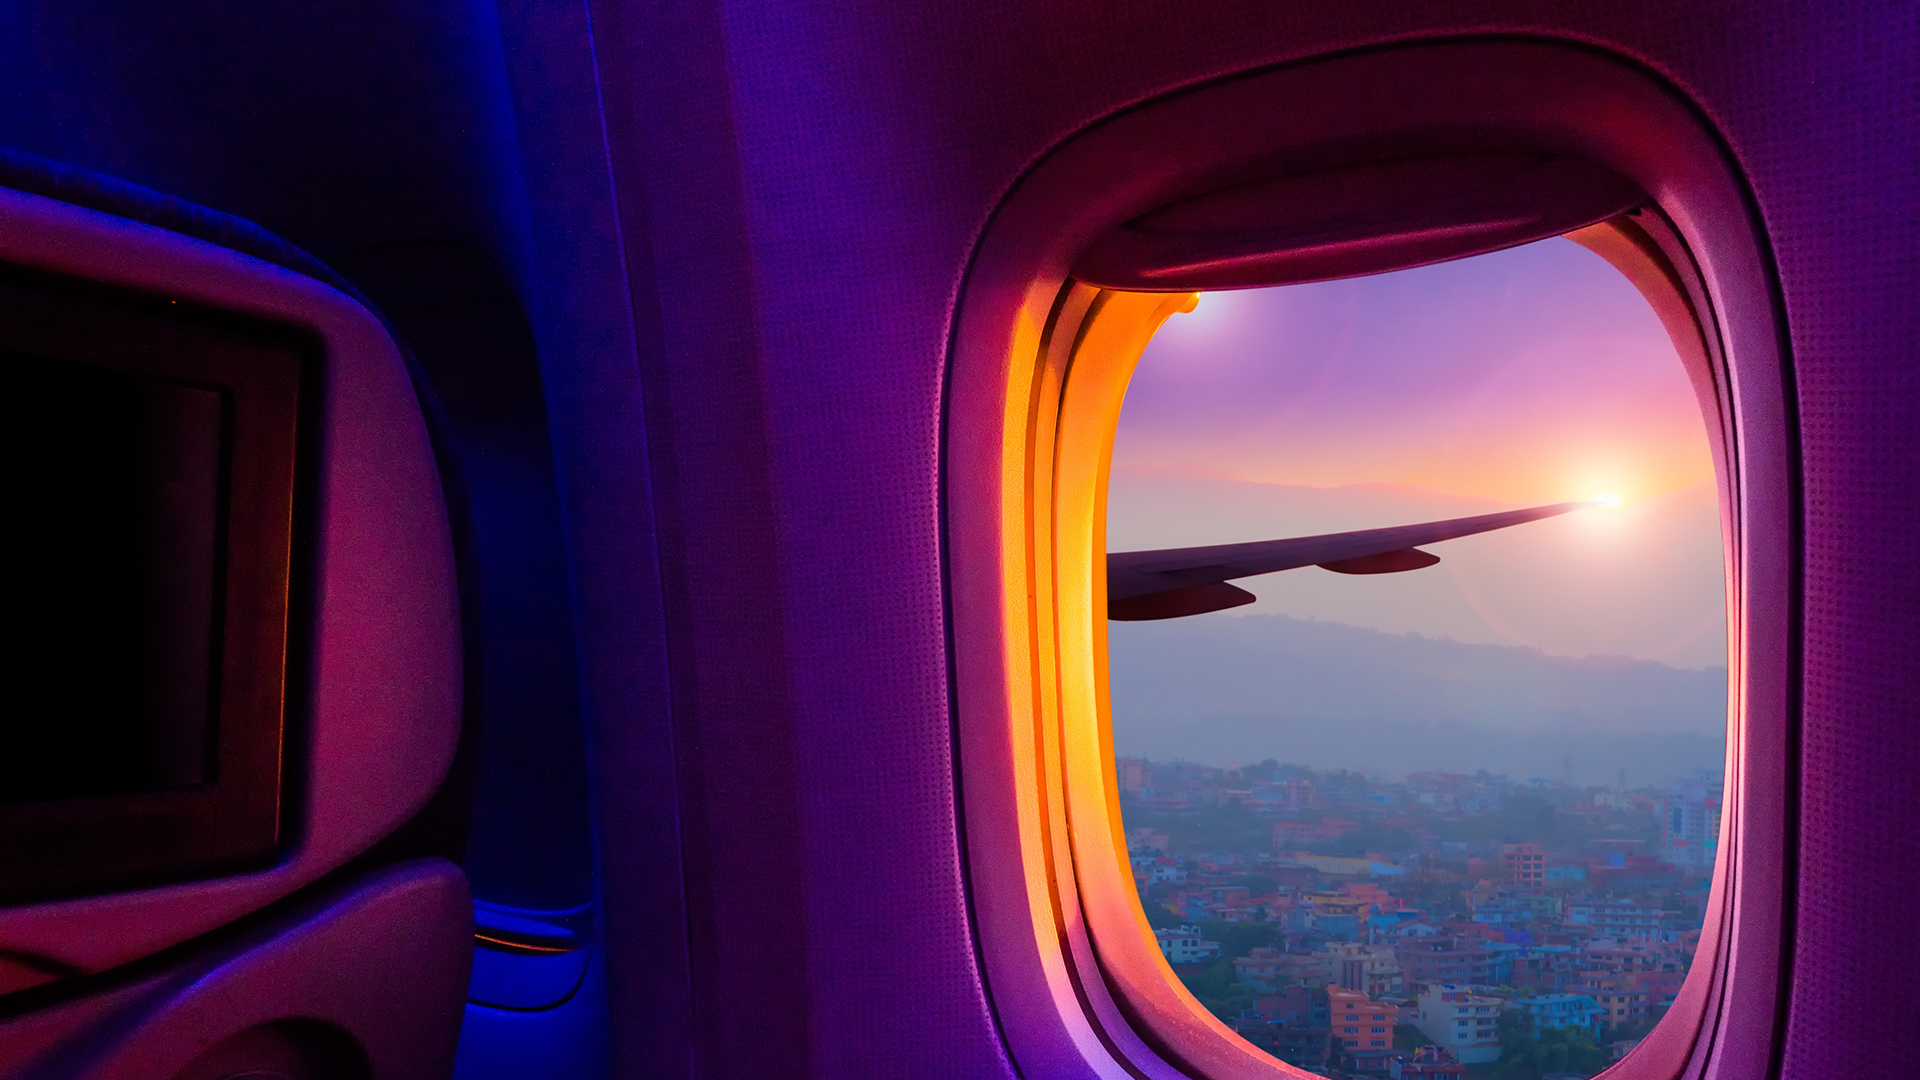 Airplane seat and open window looking out onto the wing and sunset